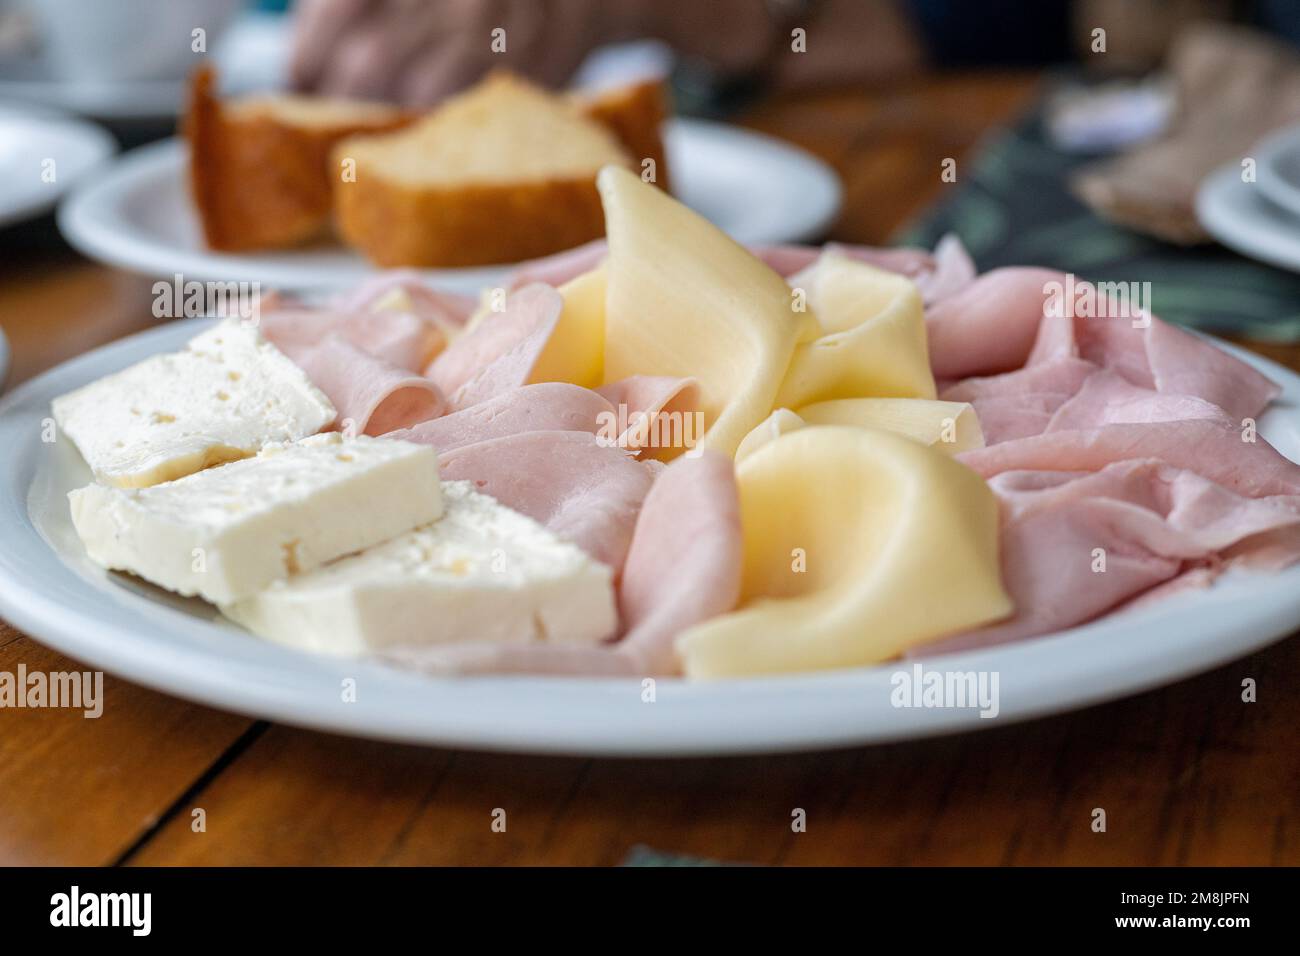 Brazilian breakfast concept with Minas cheese (queijo minas), ham and Prato cheese (queijo Prato) served with corn bread, under natural light, realist Stock Photo